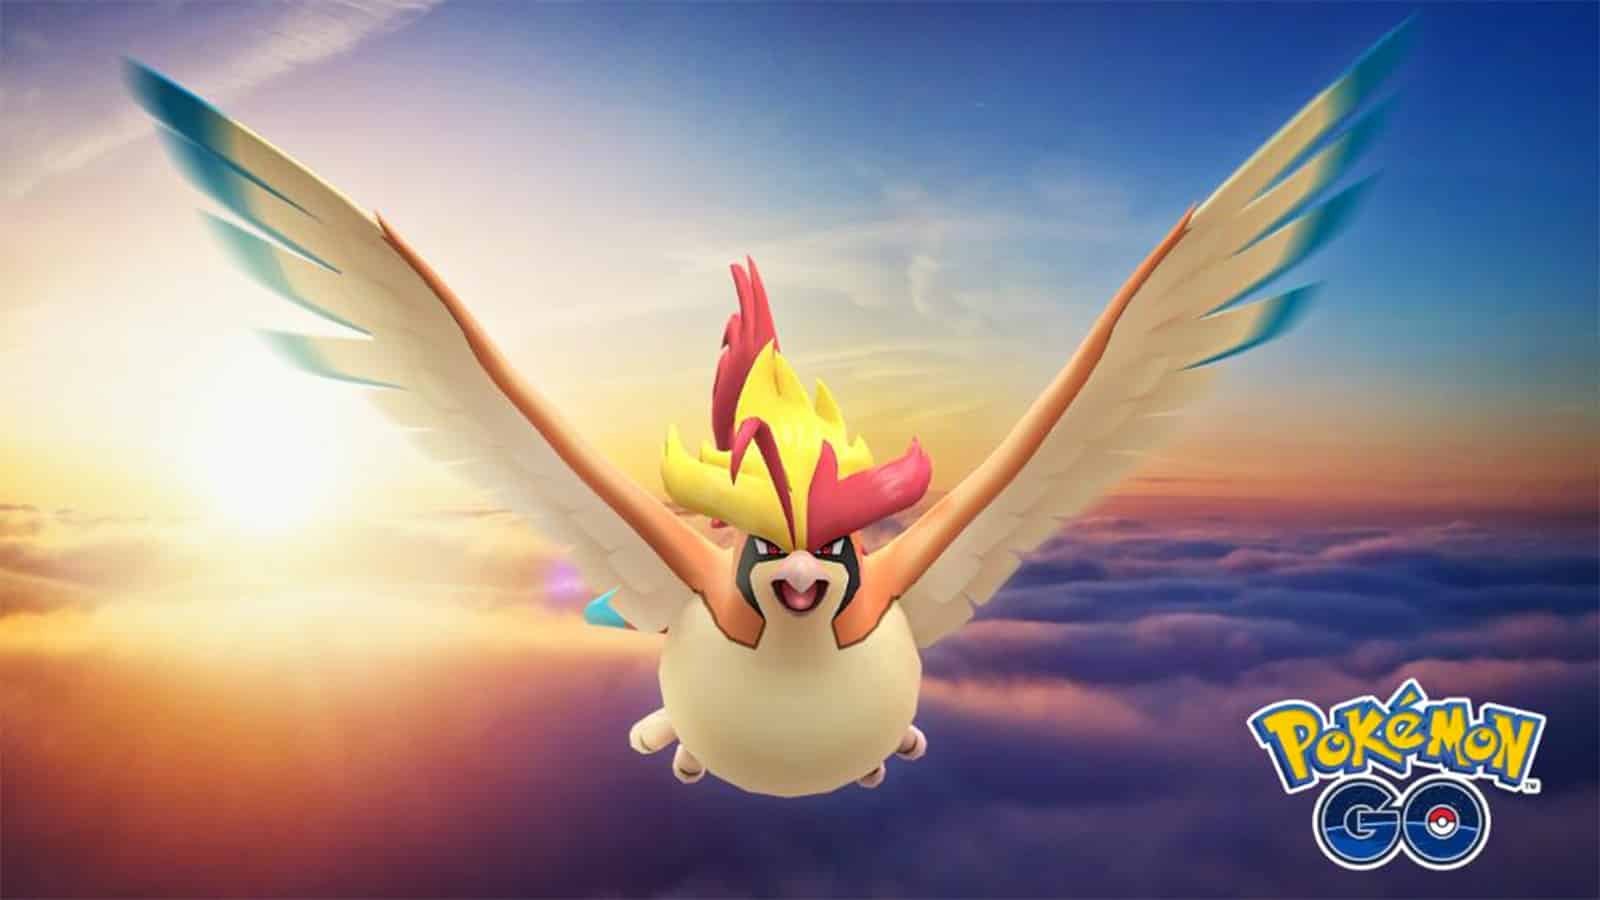 Pokemon GO: Shadow Ho-oh weaknesses and best counters